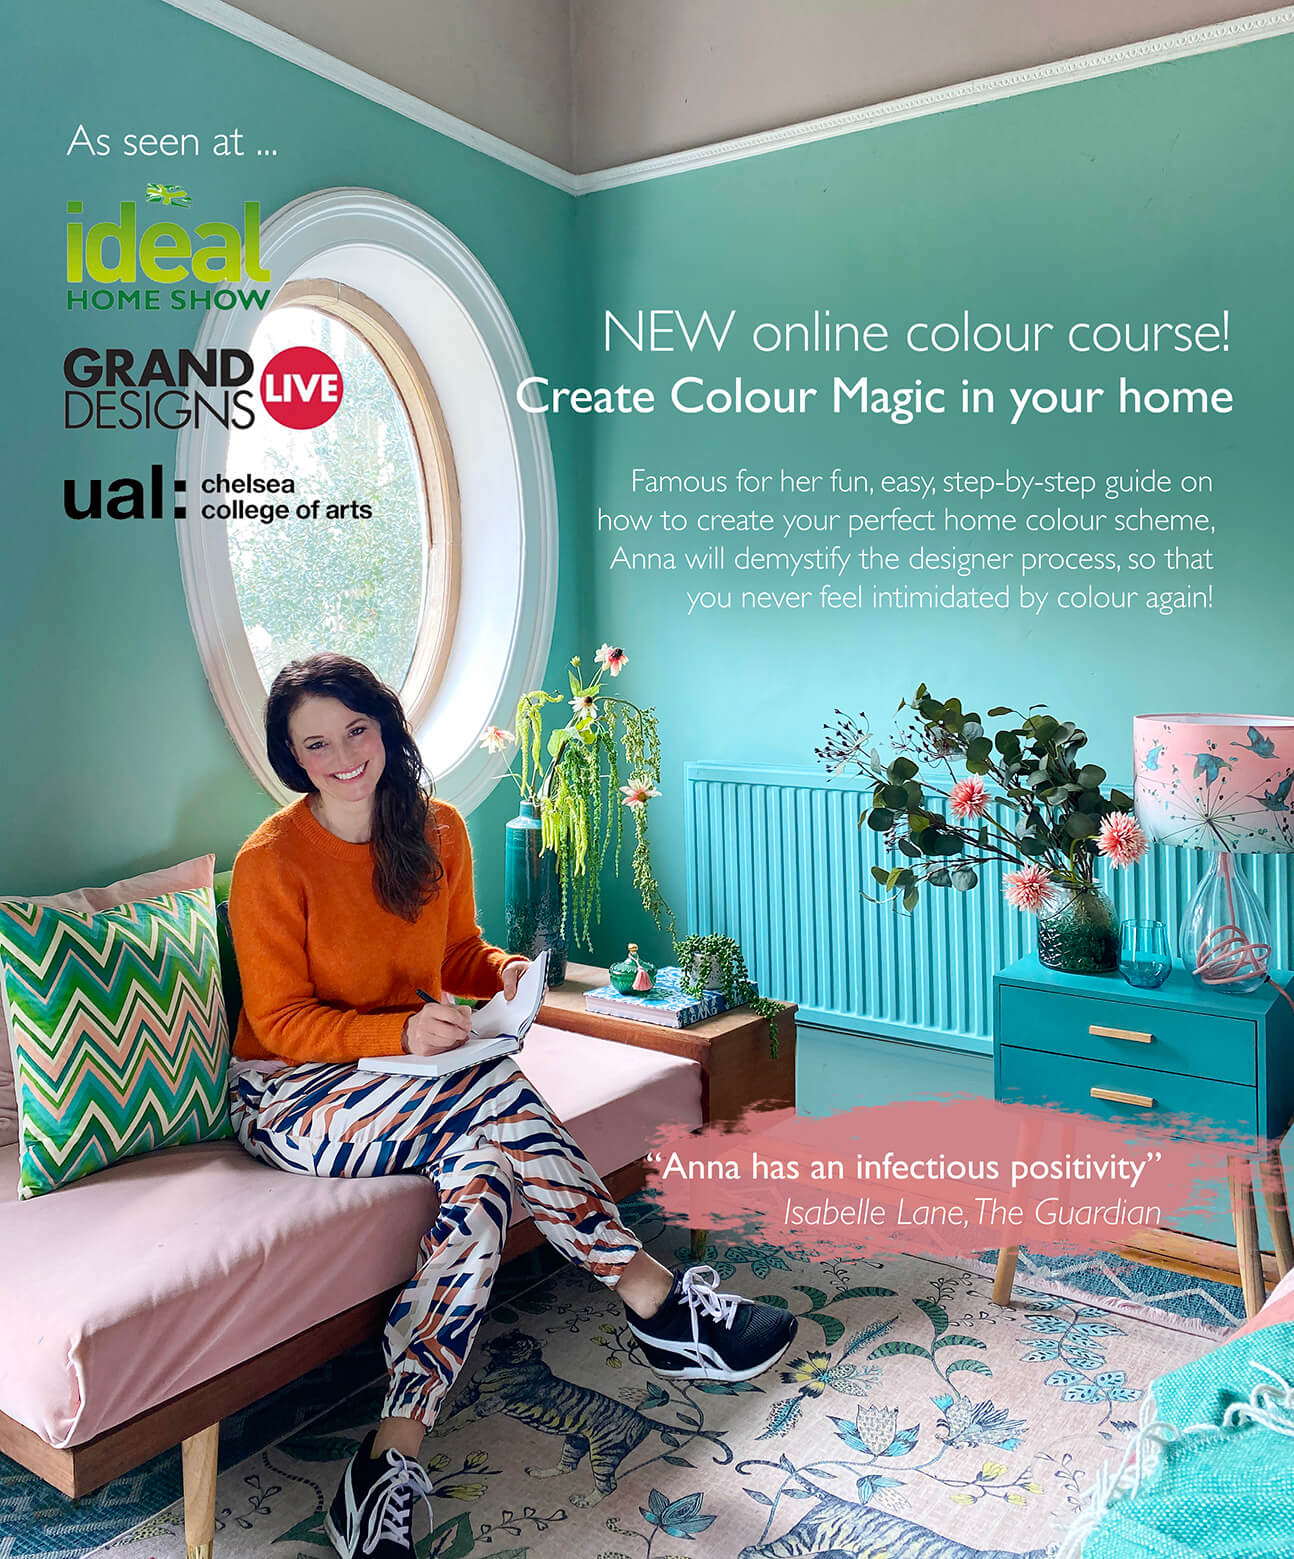 Online course with The Colour Doctor, Anna Jacobs - Create Colour Magic in Your Home